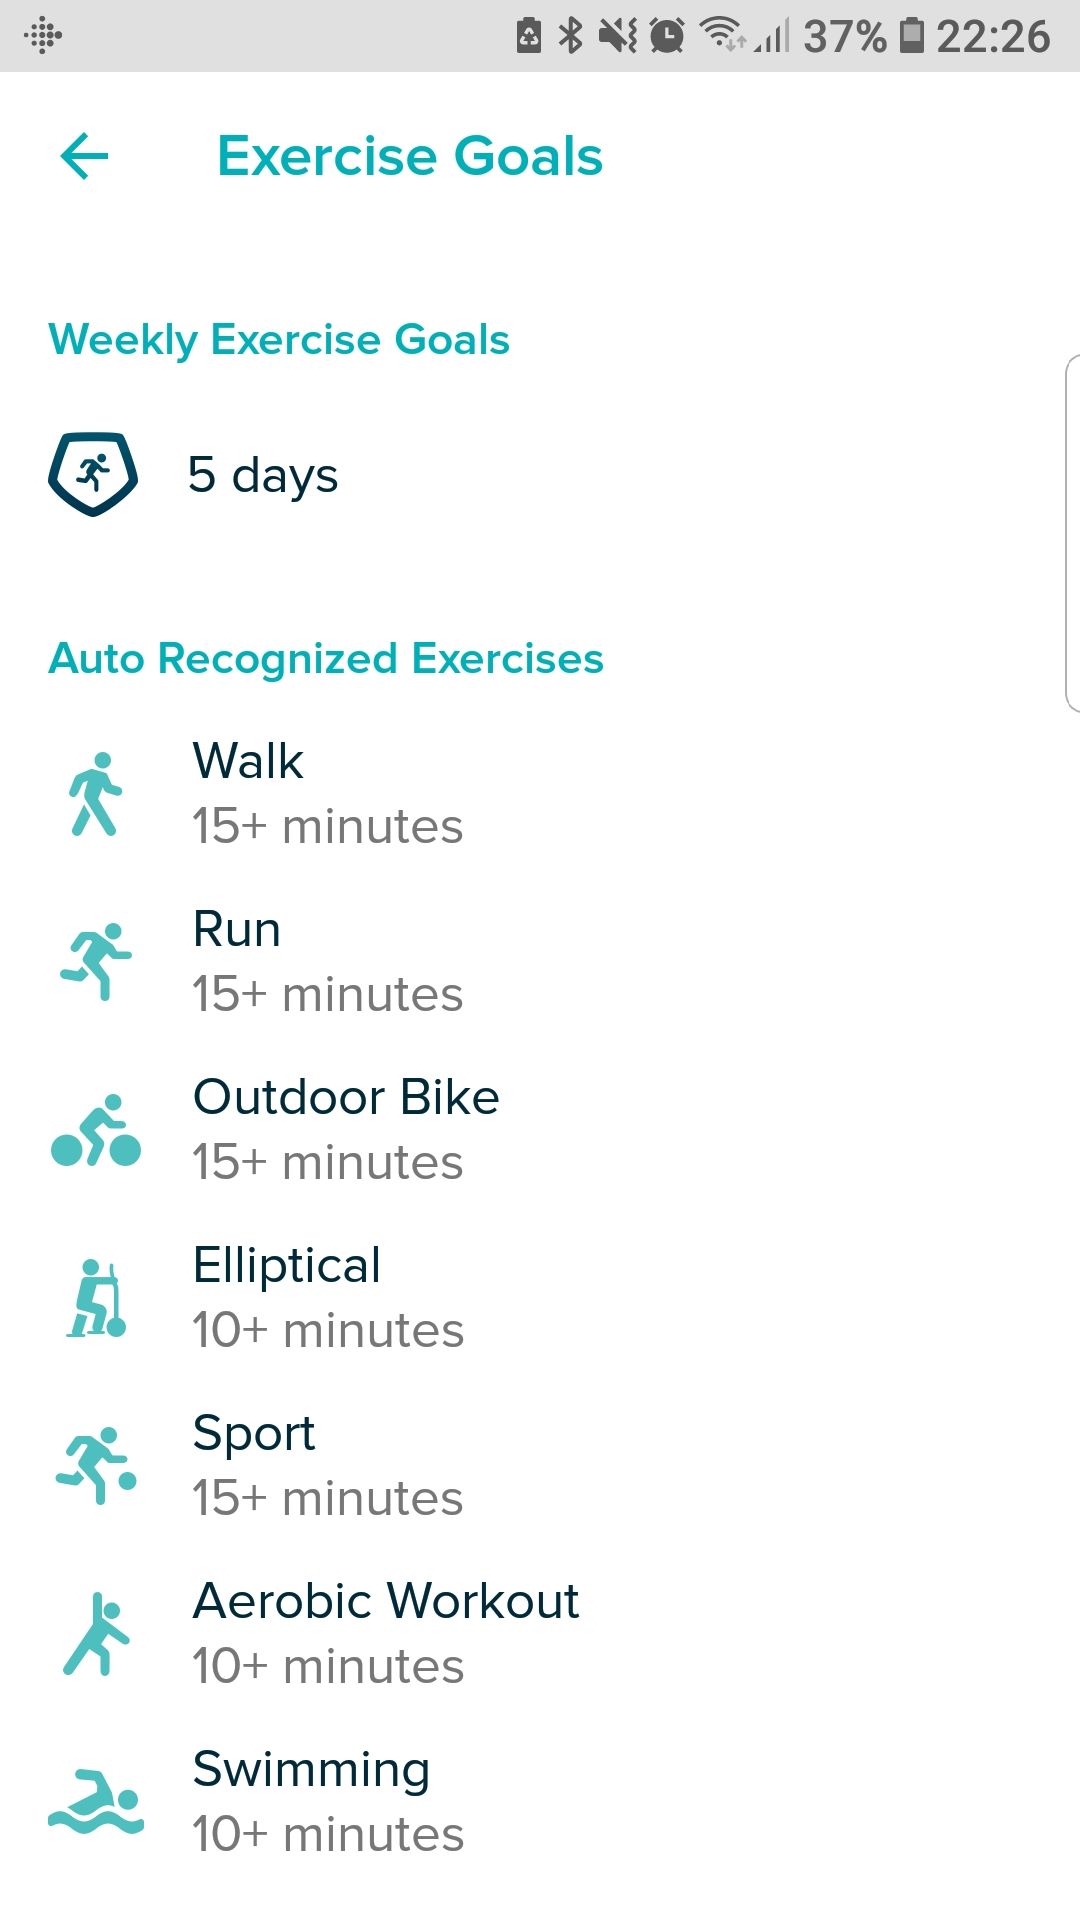 How do I add exercises on Charge 3 